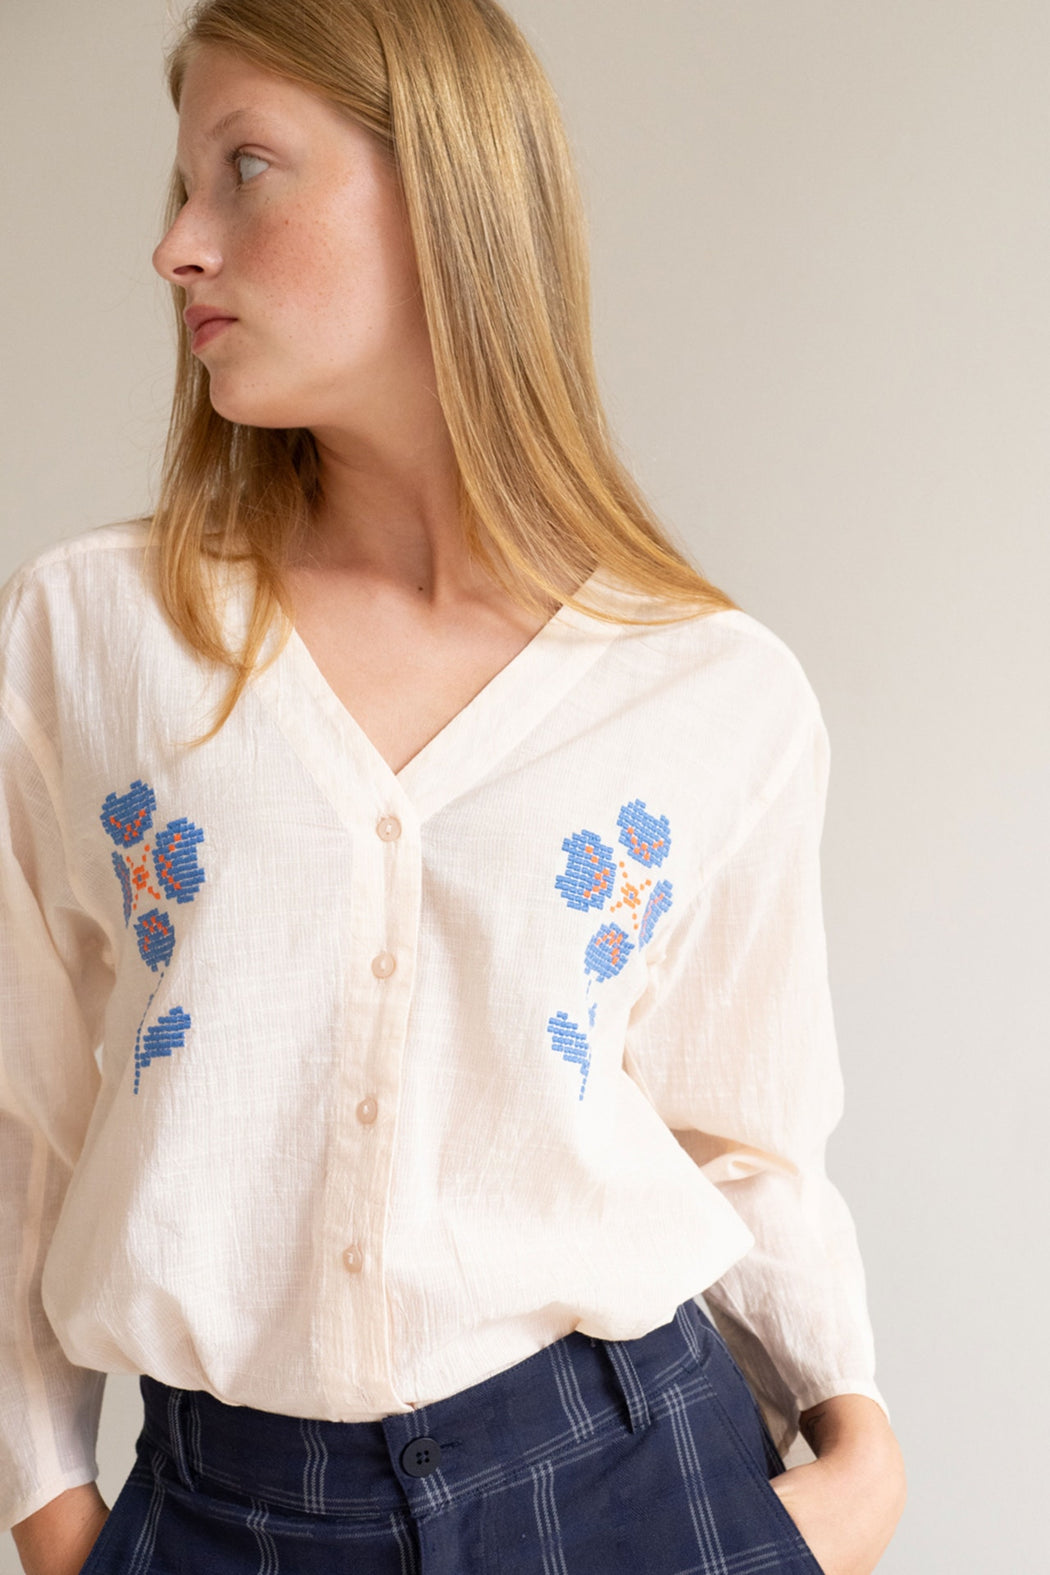 The Tiny Big Sister Flower Blouse